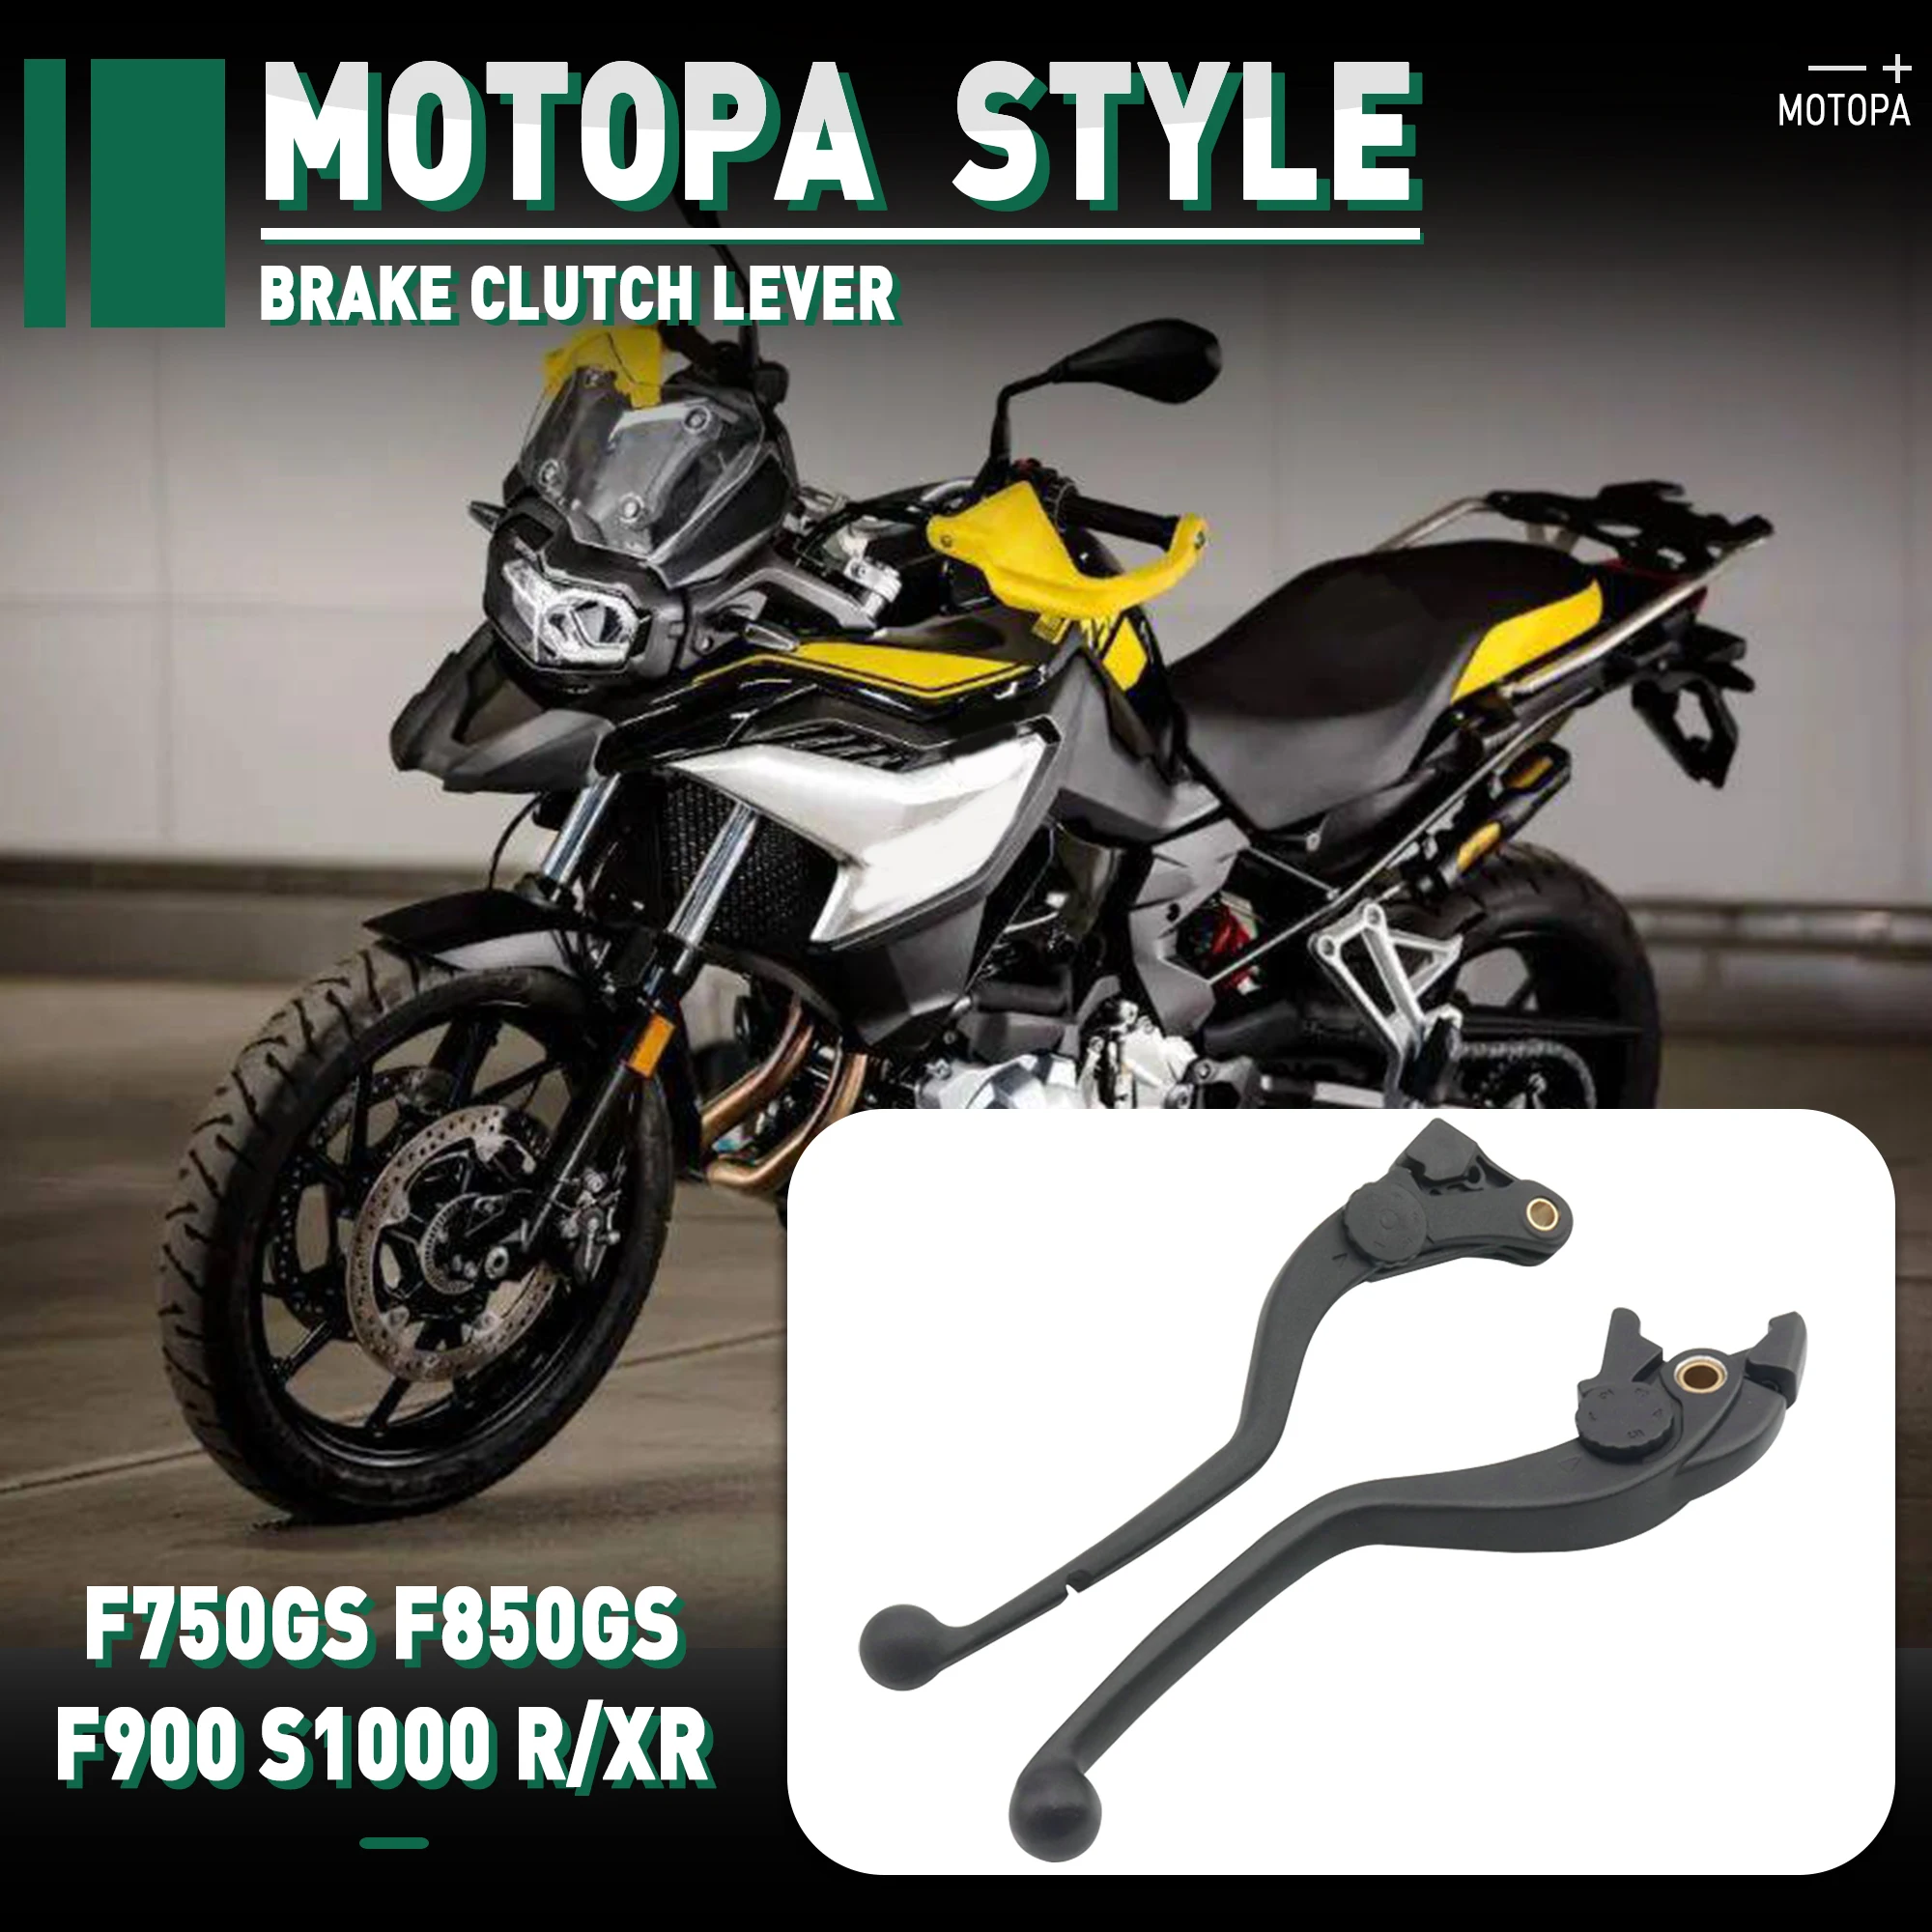 

For BMW F750GS F850GS ADV F900R F900XR S1000R S1000XR Motorcycle Brake Lever Clutch Lever S1000XR Accessories Handle Lever